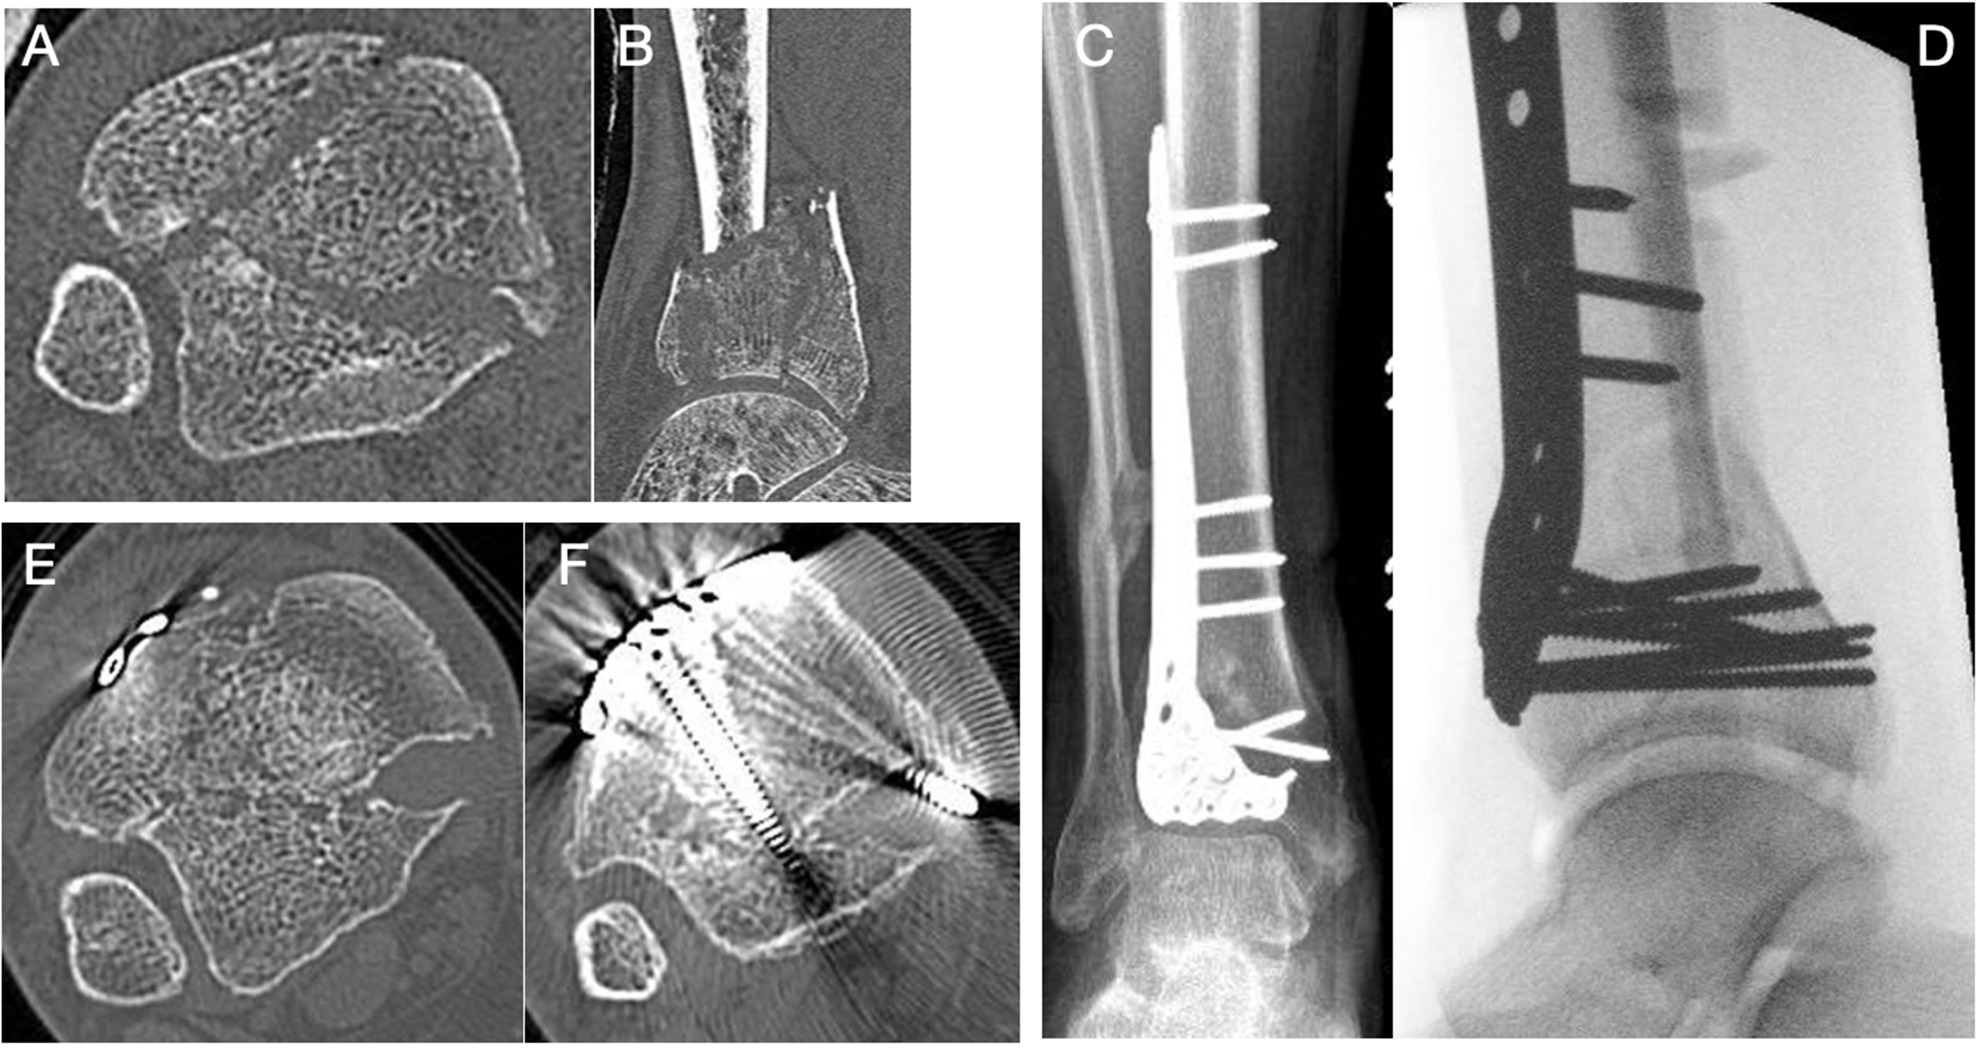 Fig. 3 
            Case of tibialis posterior (TP) entrapment following fixation of a pilon fracture. a) and b) Initial CT scans show that the fracture enters the TP sheath. c) and d) Postoperative and intraoperative fixation of the pilon. e) and f) Axial CT scans showing not only the encapsulated tendon forming its own tunnel in the healed fracture site, but also a screw encroaching on the TP from the anterior plate fixation.
          